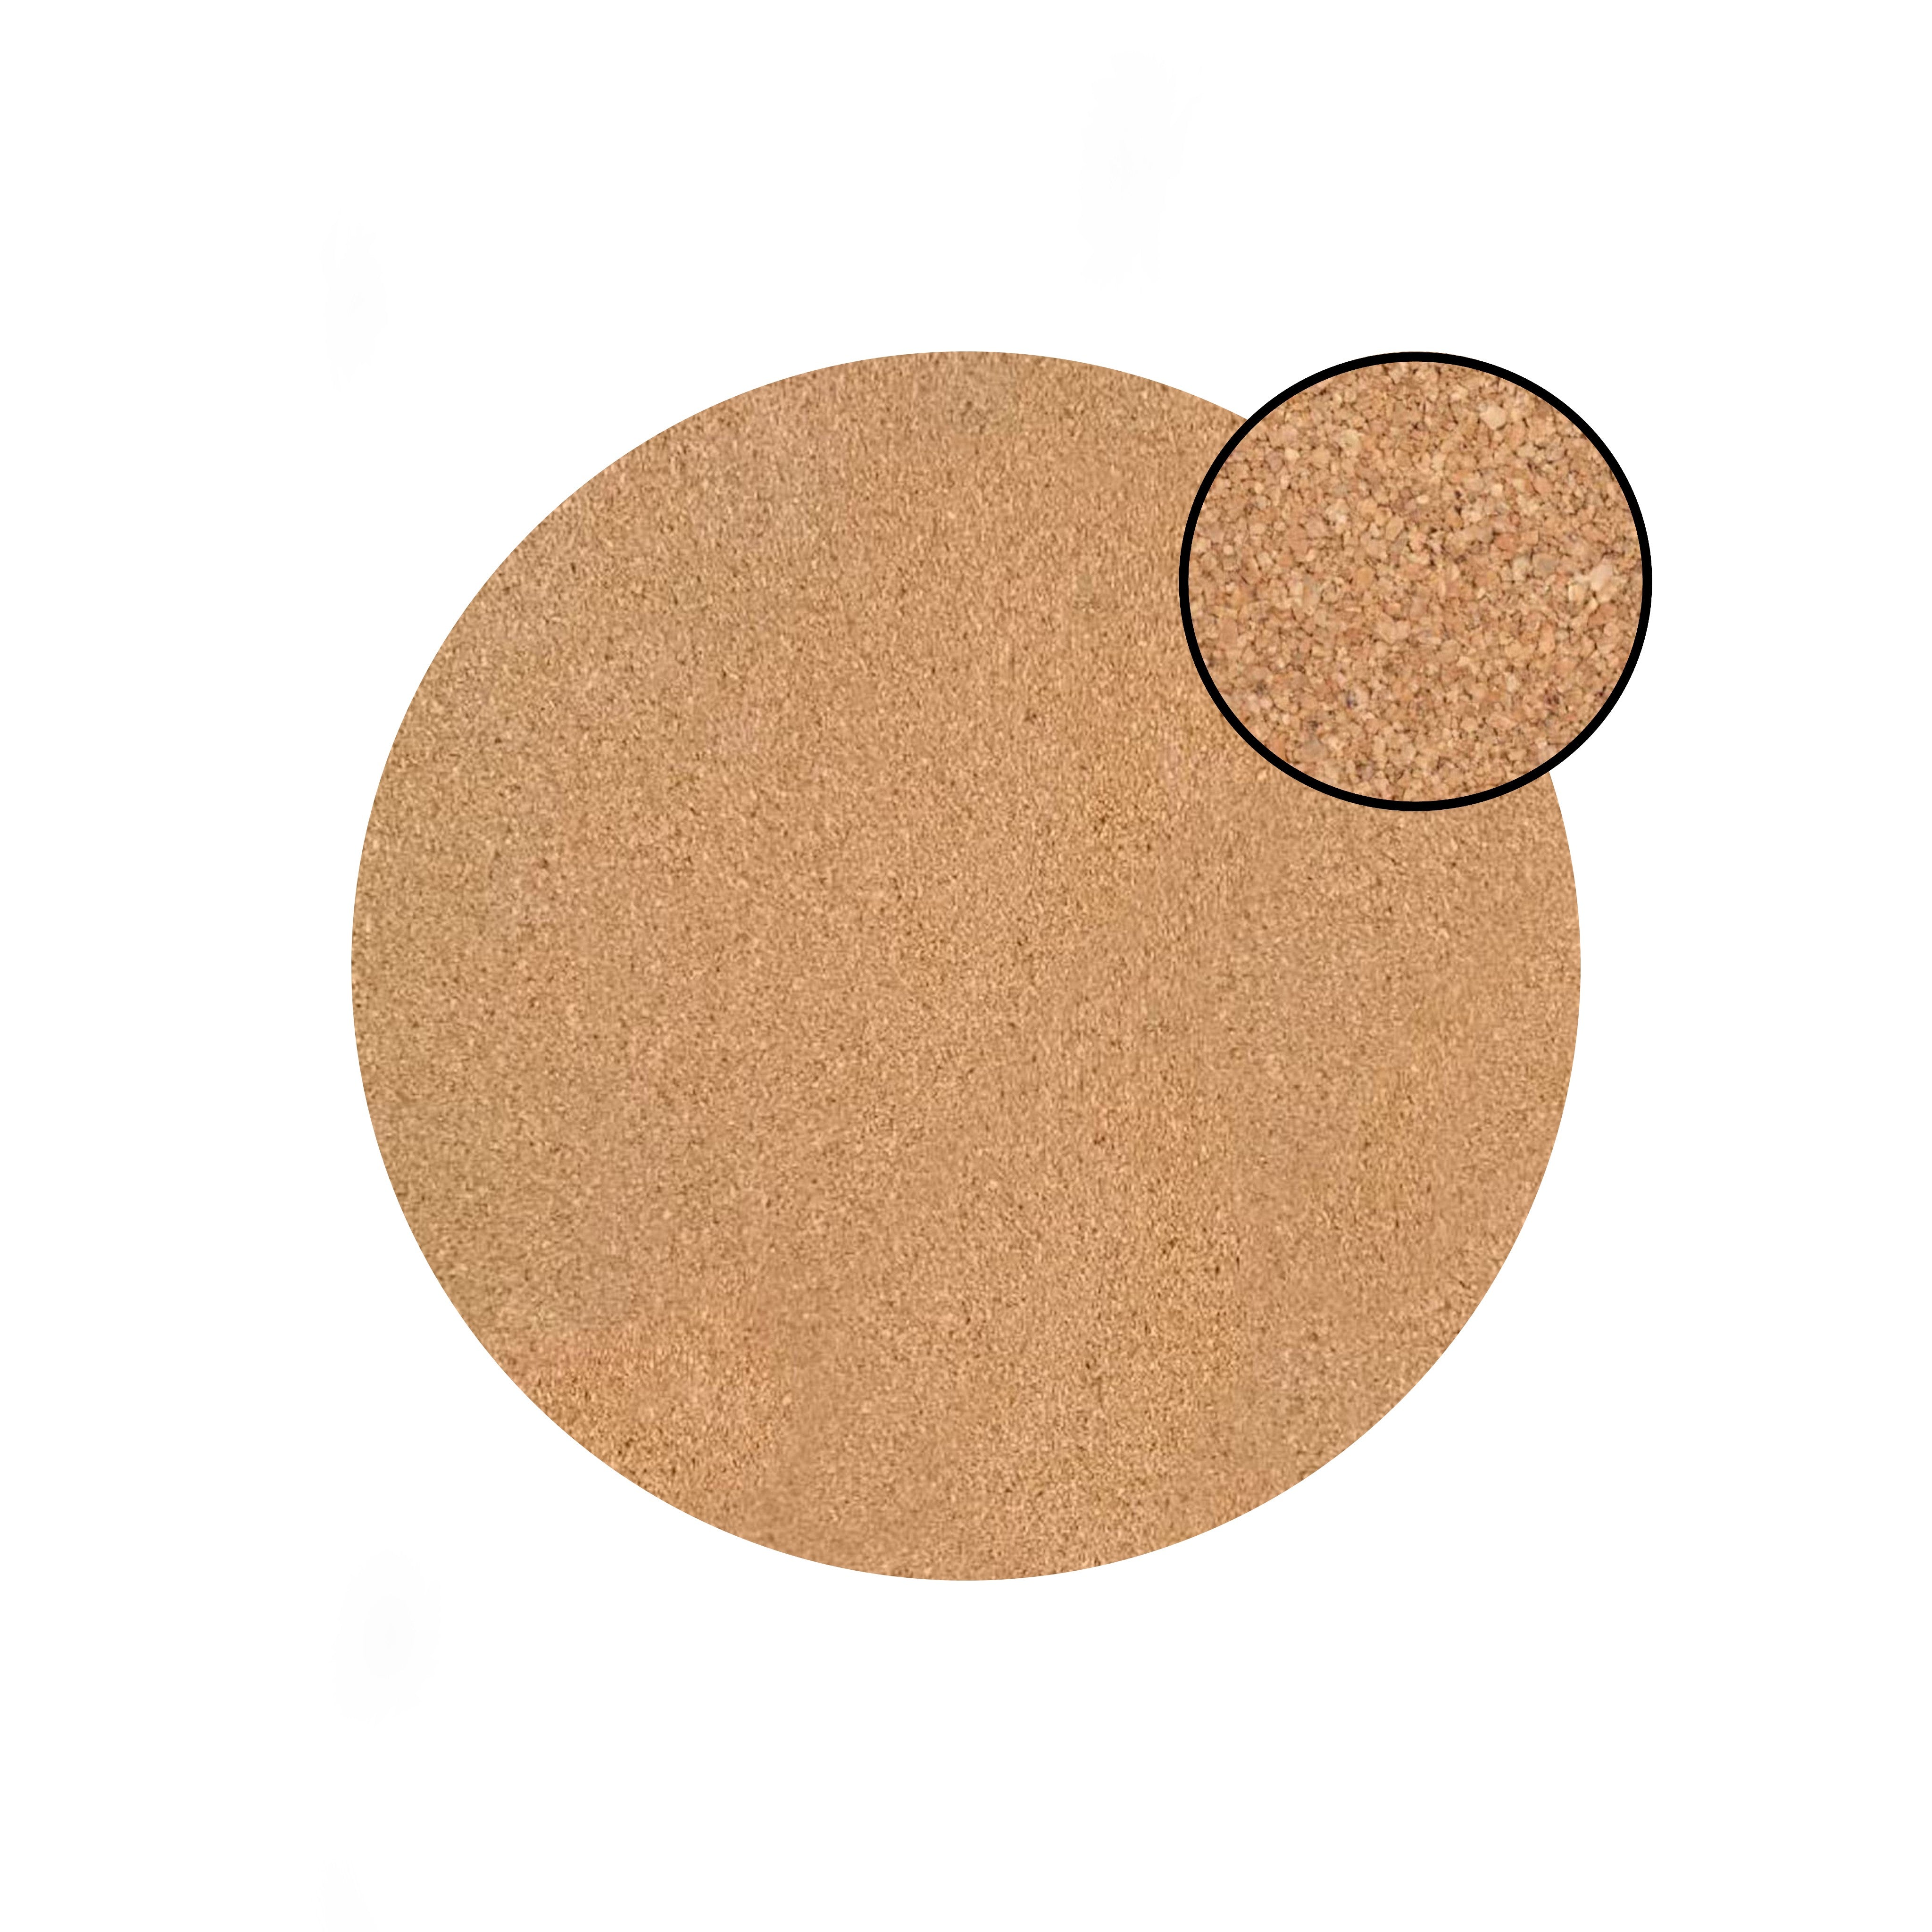 Dainty Home Concentric Foil Printed Geometric Designed Thick Cork Textured 15" x 15" Round Placemats